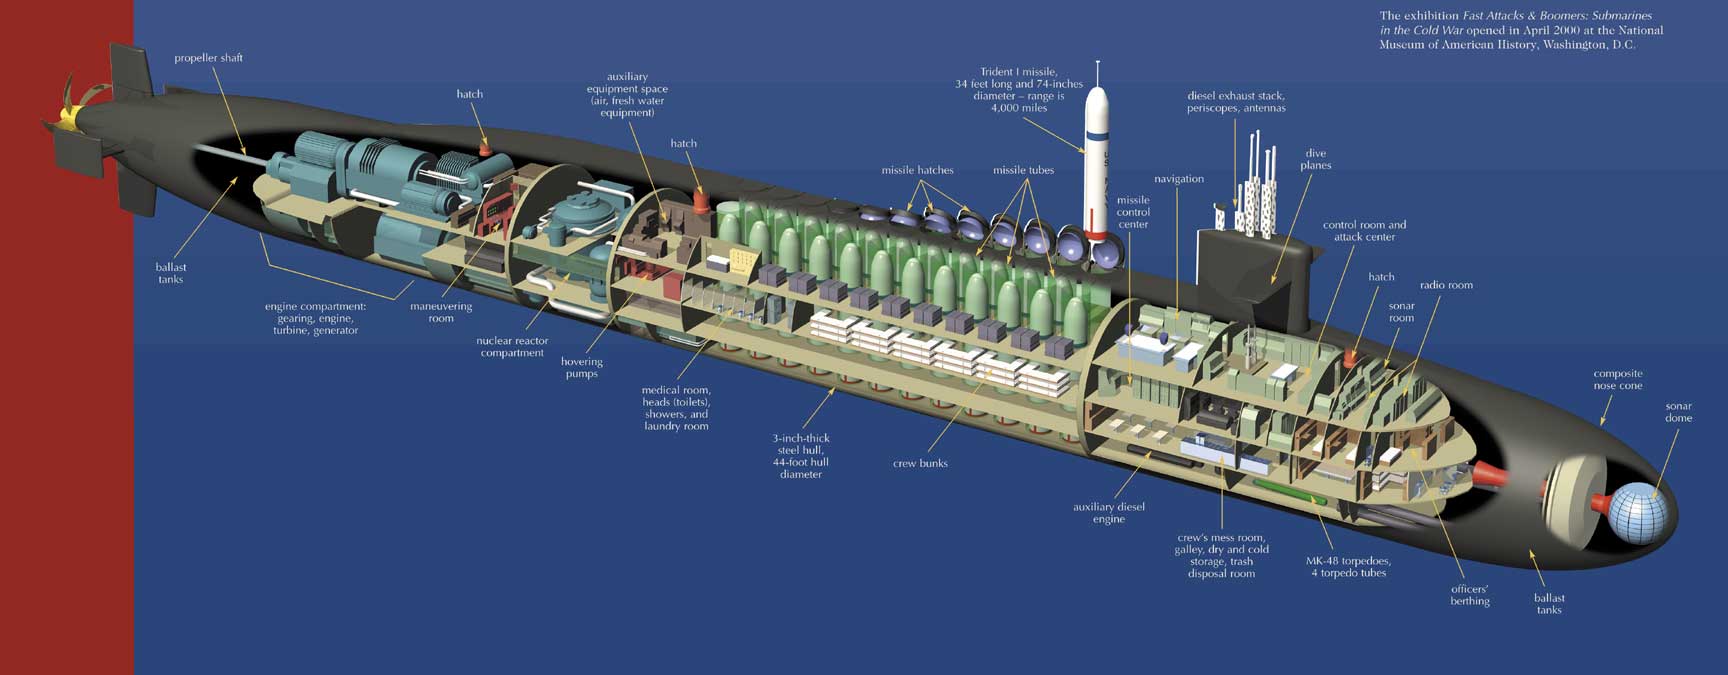 A ballistic missile submarine cutaway from the Smithsonian